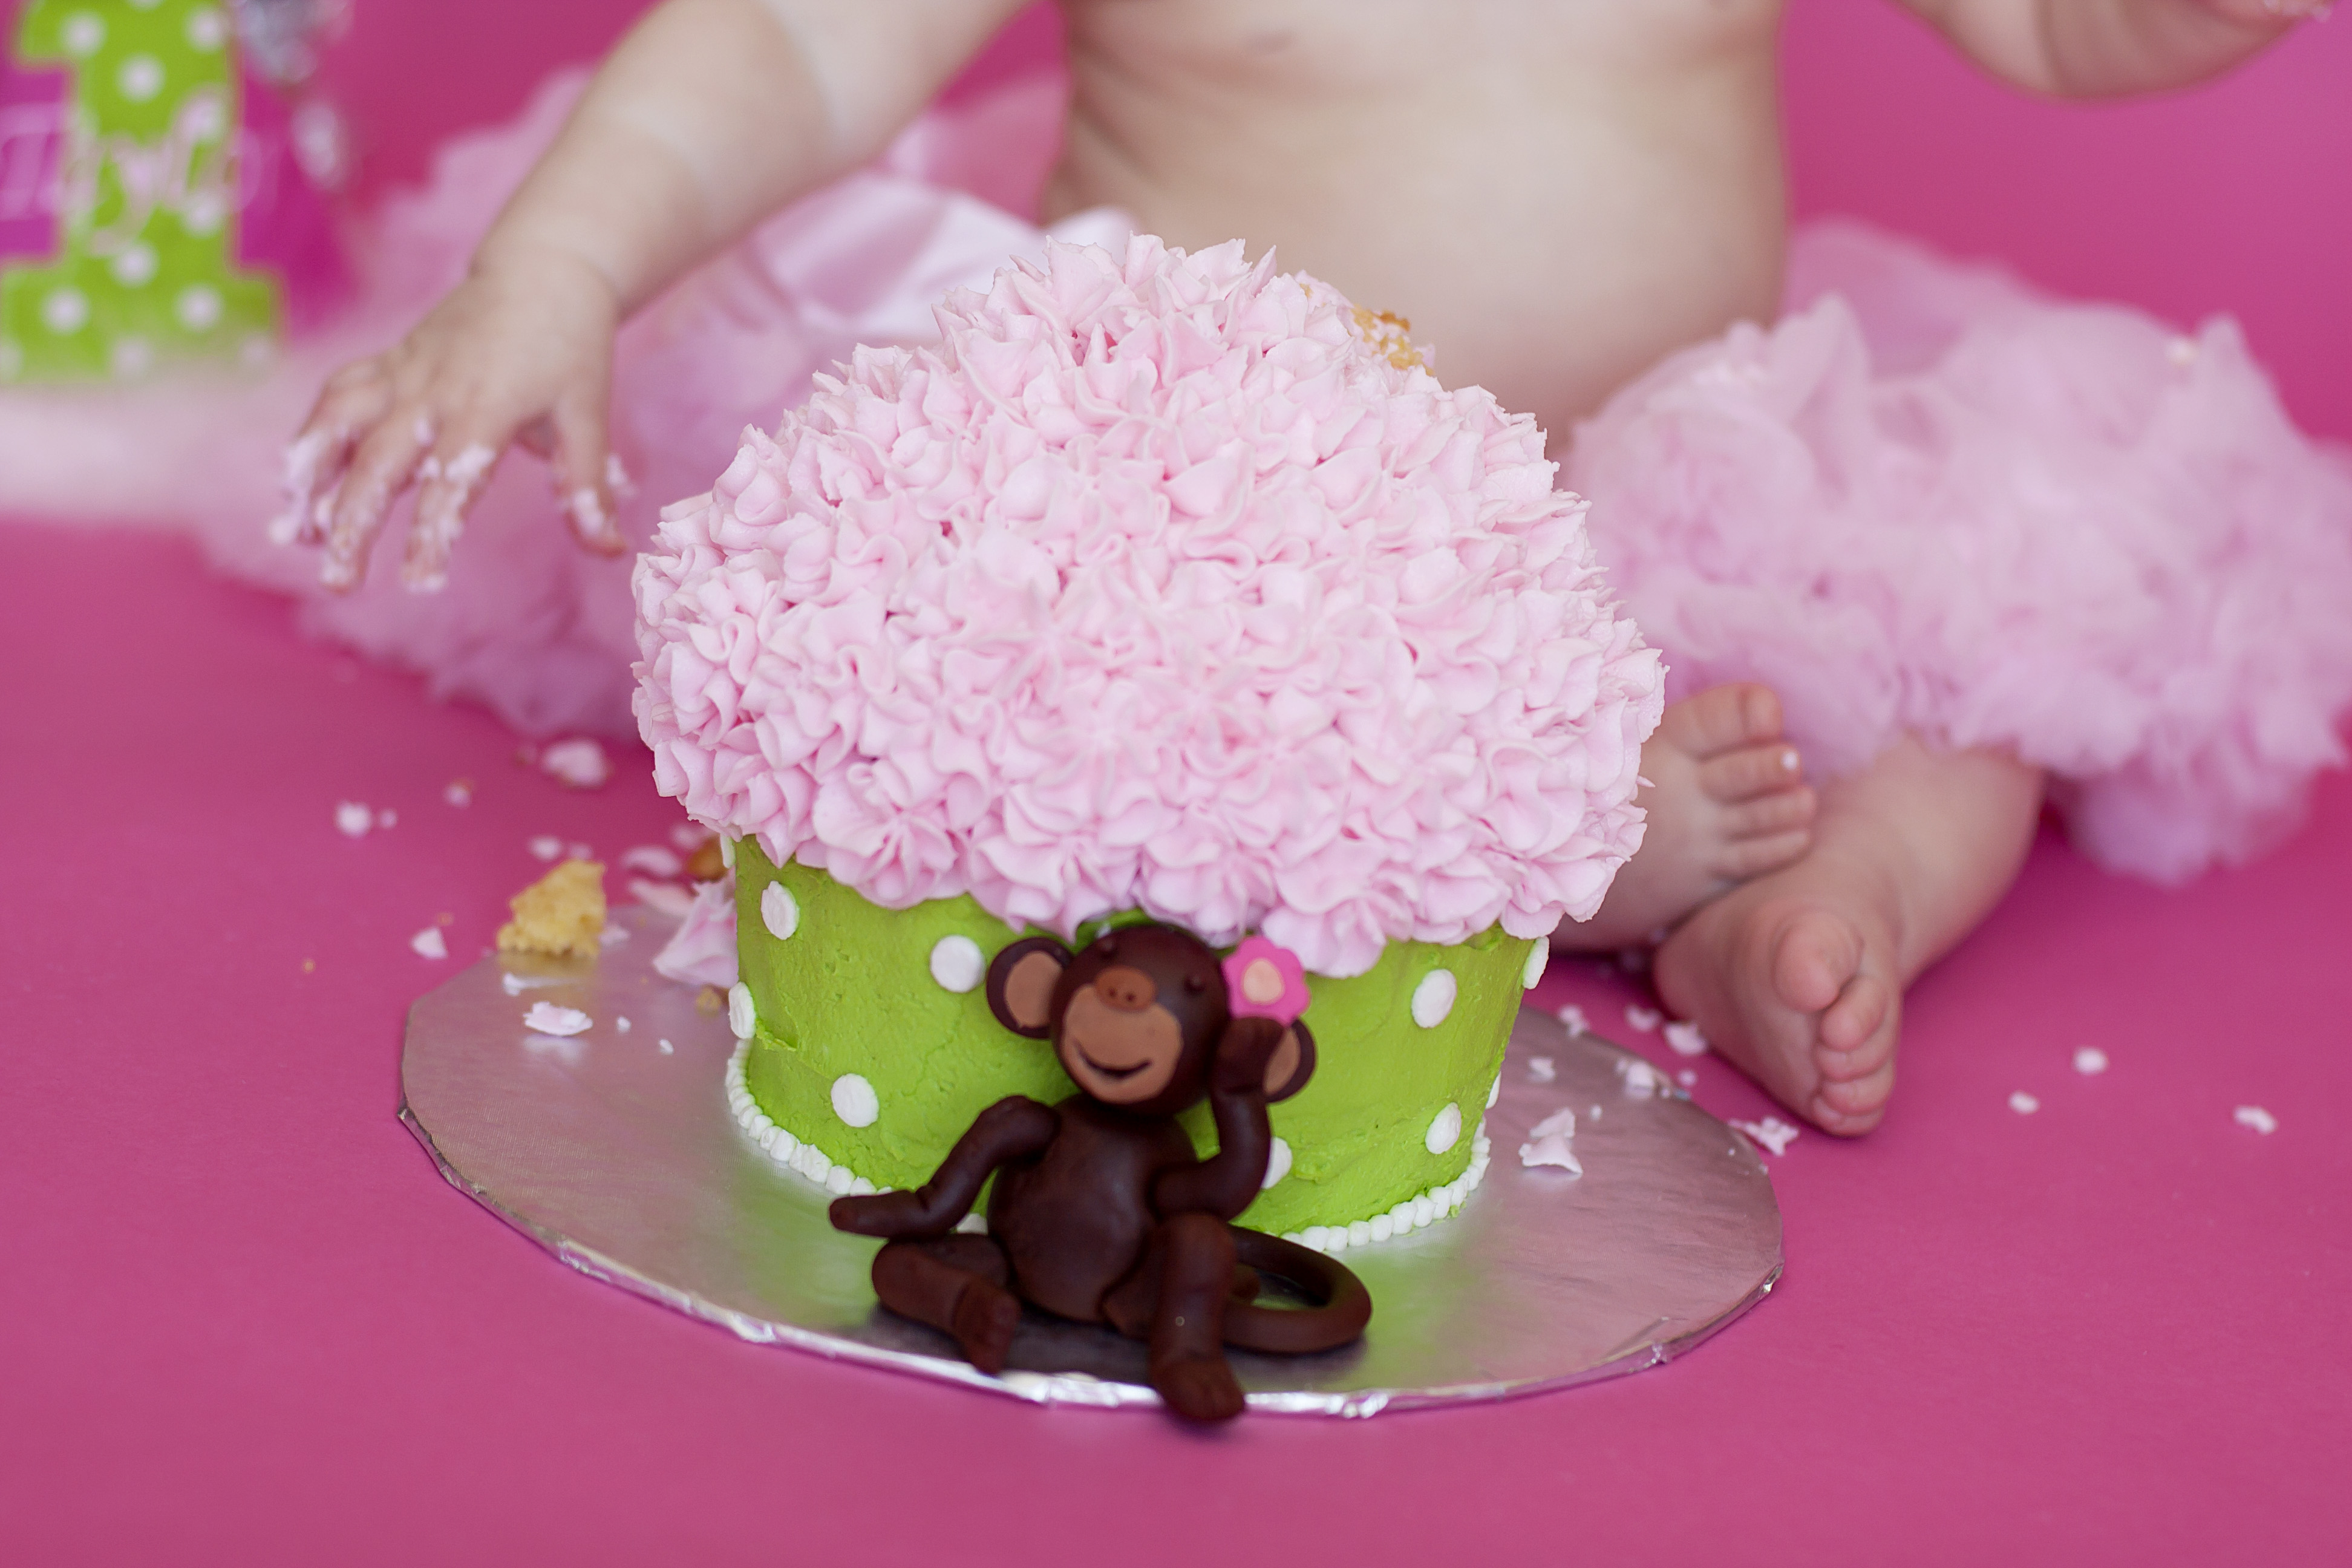 Miss T’s Girlie Filled Fun Cake Smash | New Jersey Children’s Photographer